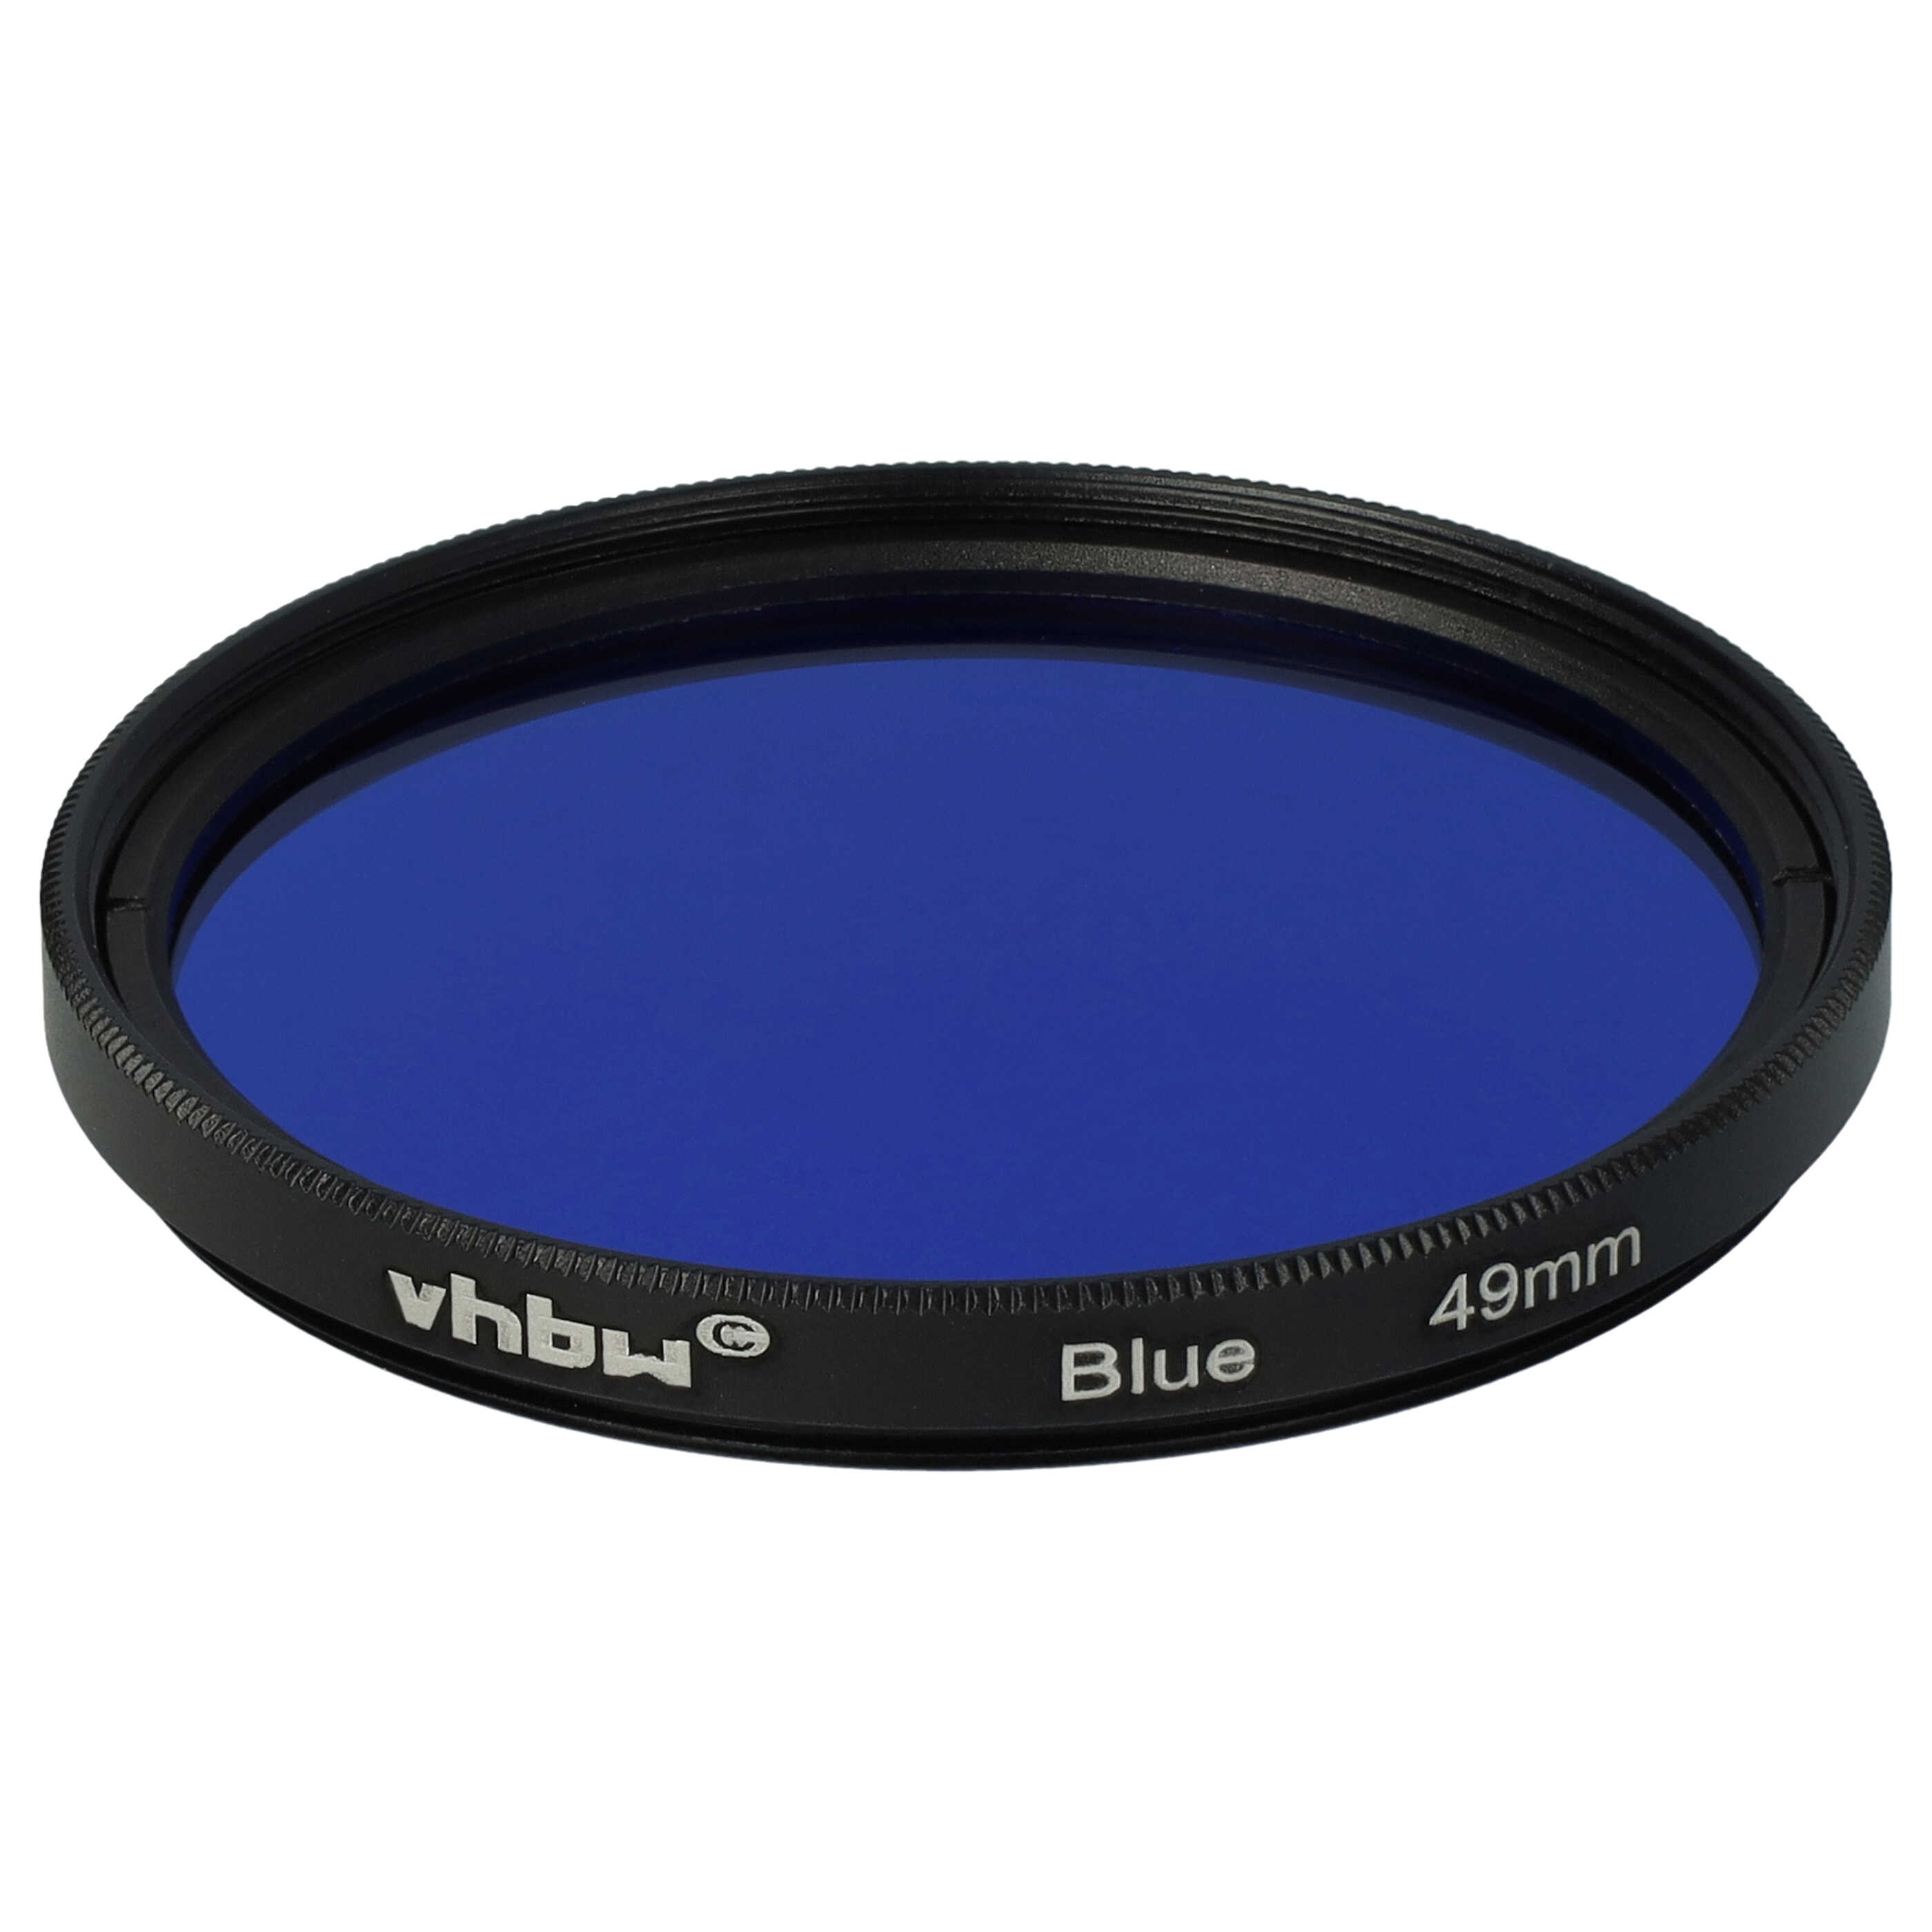 Coloured Filter, Blue suitable for Camera Lenses with 49 mm Filter Thread - Blue Filter